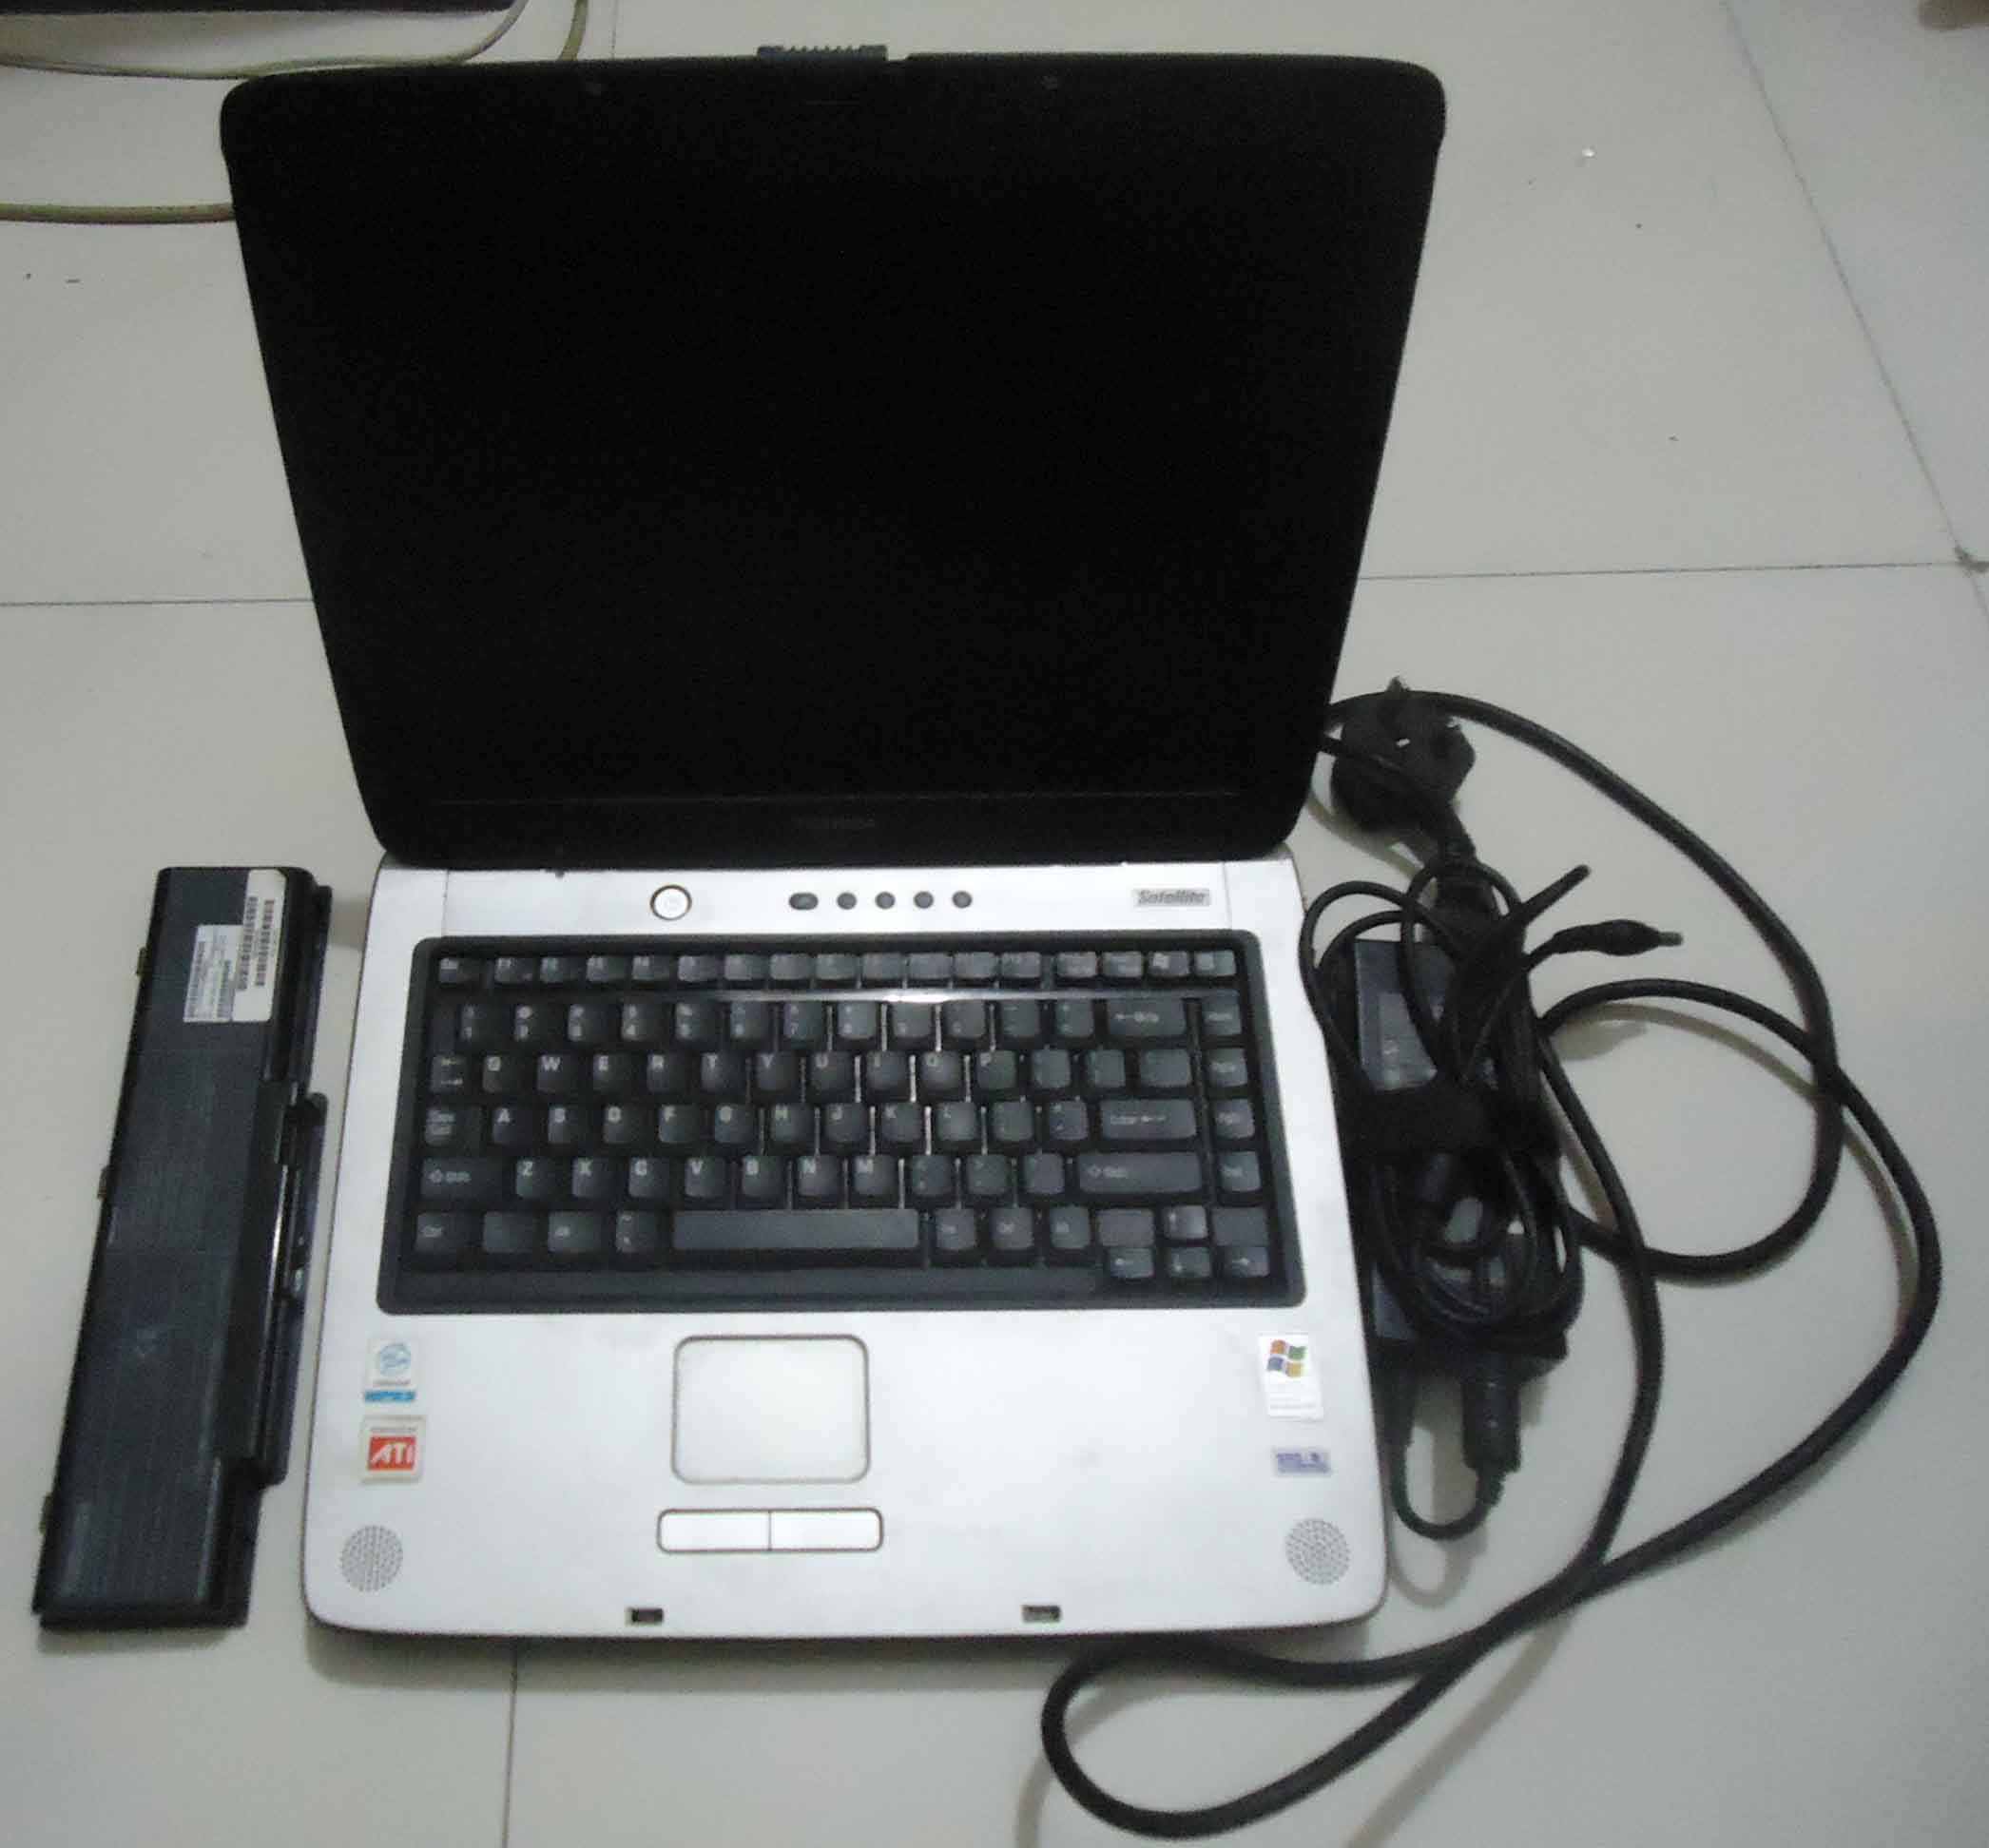 Toshiba Satellite A60 parts or system large image 0